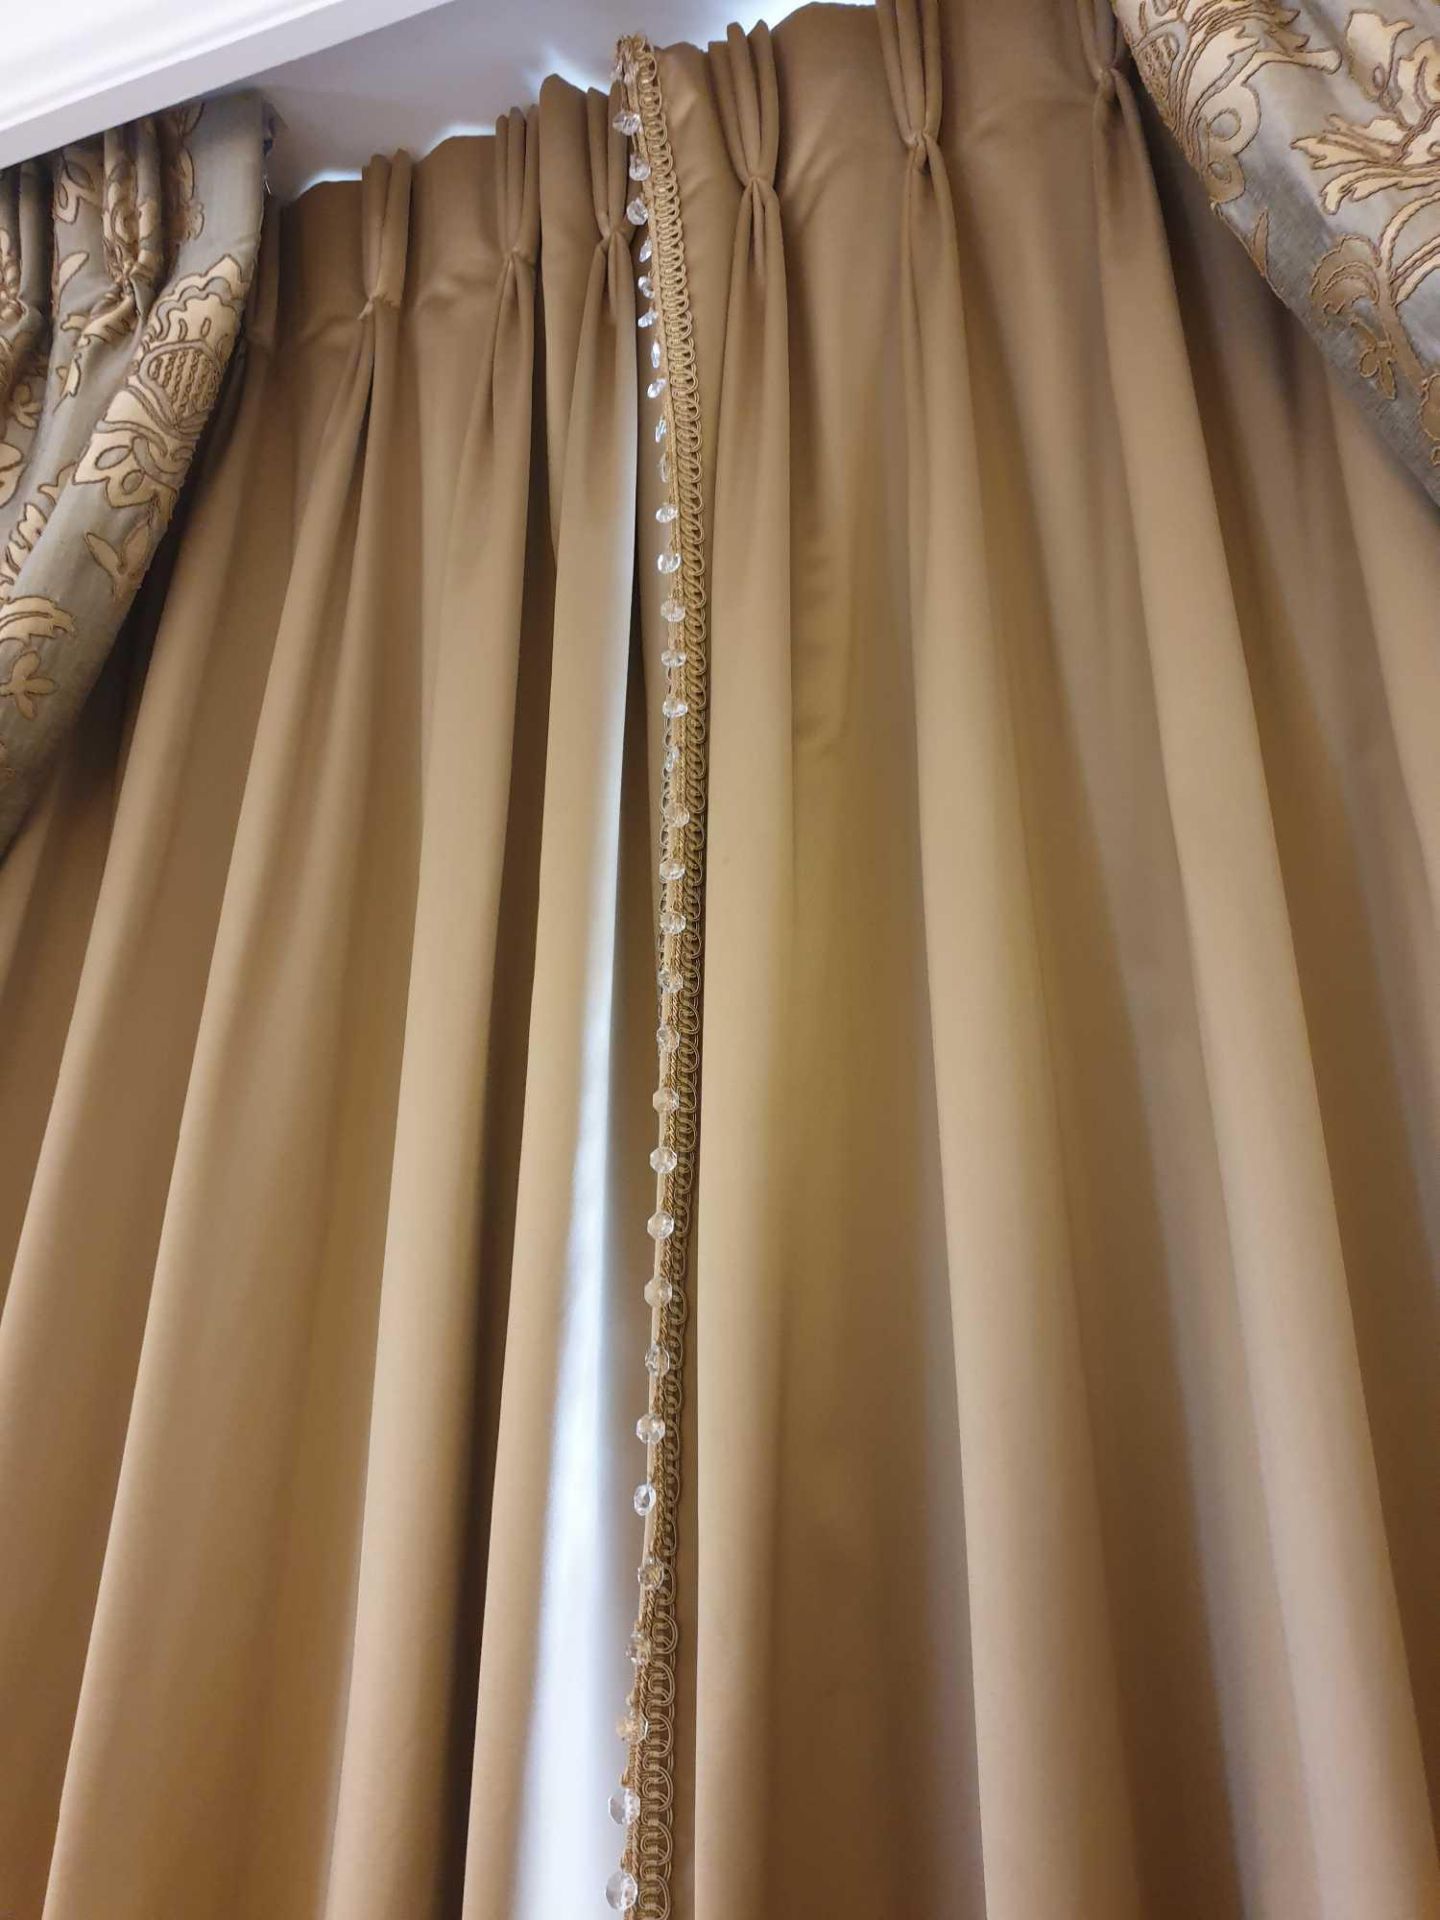 A Pair Of Silk Drapes And Jabots 130 x 280cm (Room 701) - Image 2 of 3